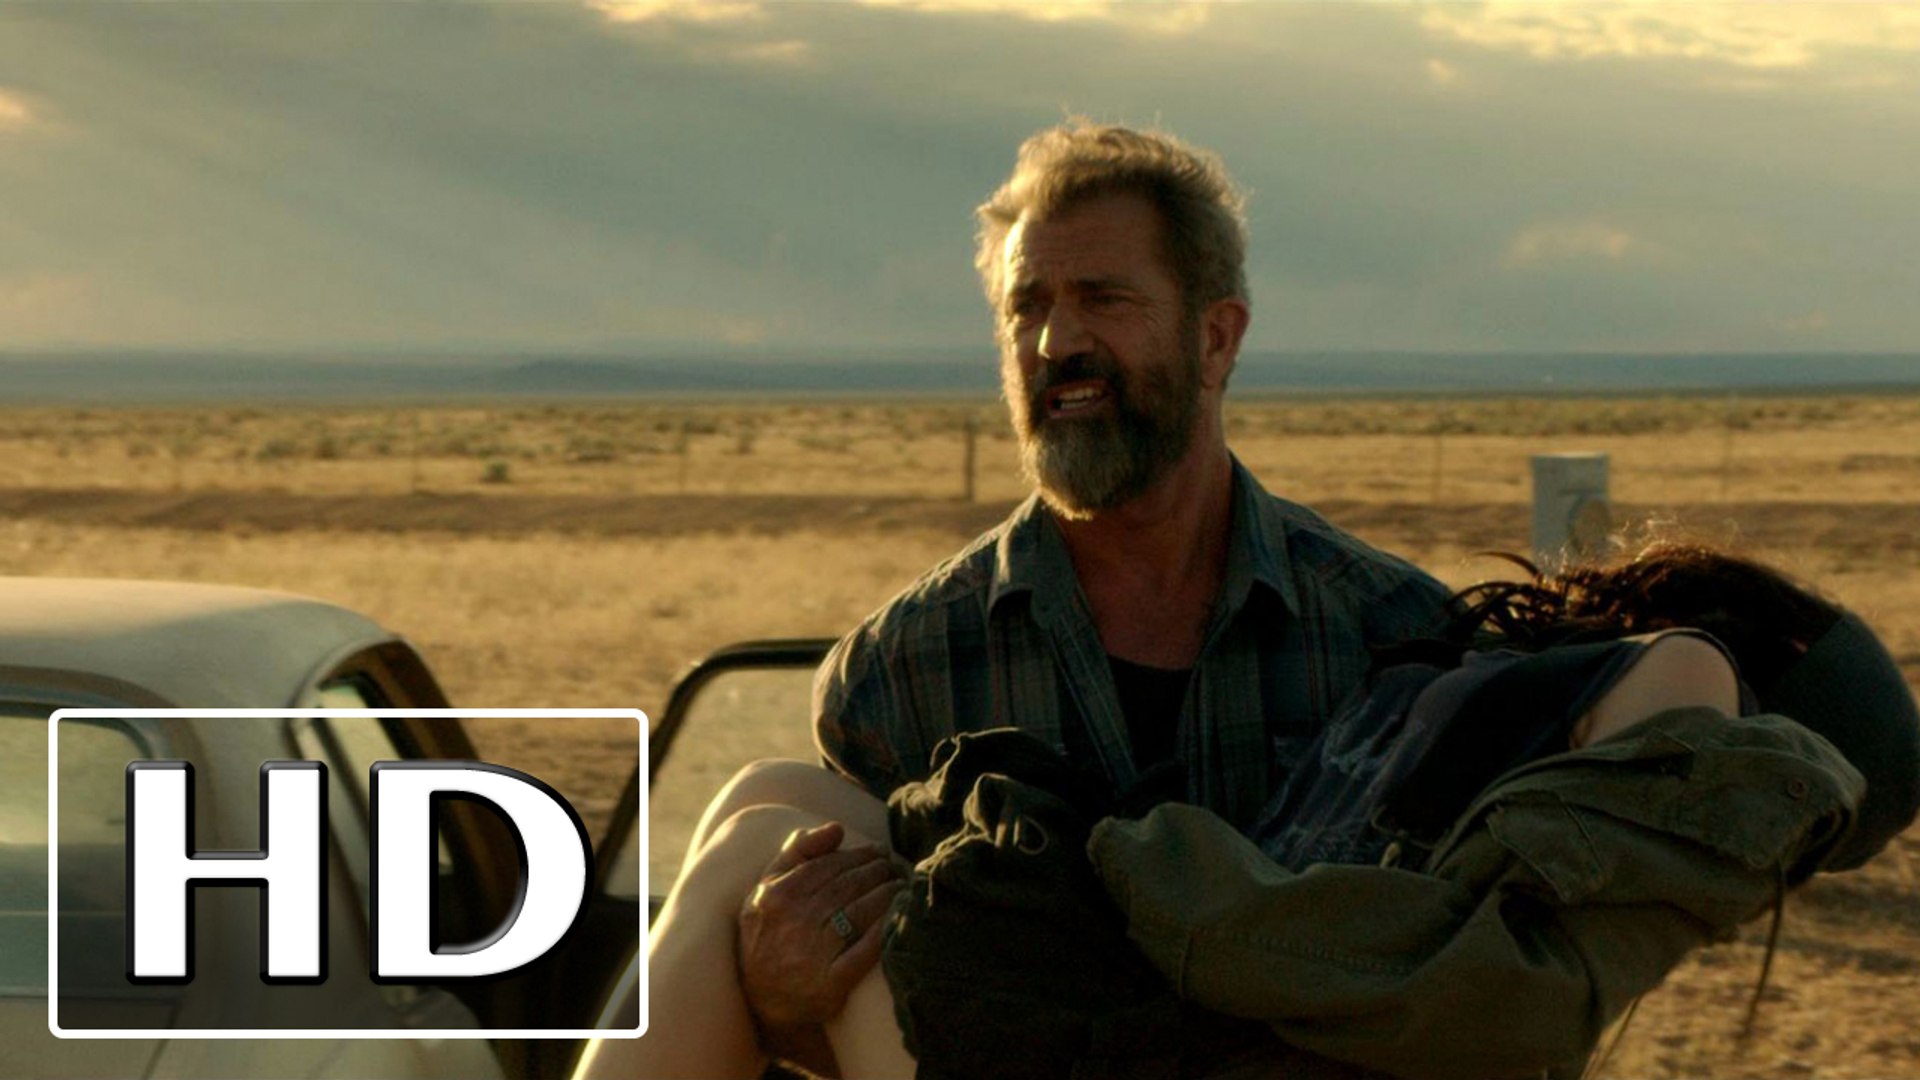 Watch Blood Father Full Movie (2016) 1080p HD Online - New Action, Thriller Movies 2016